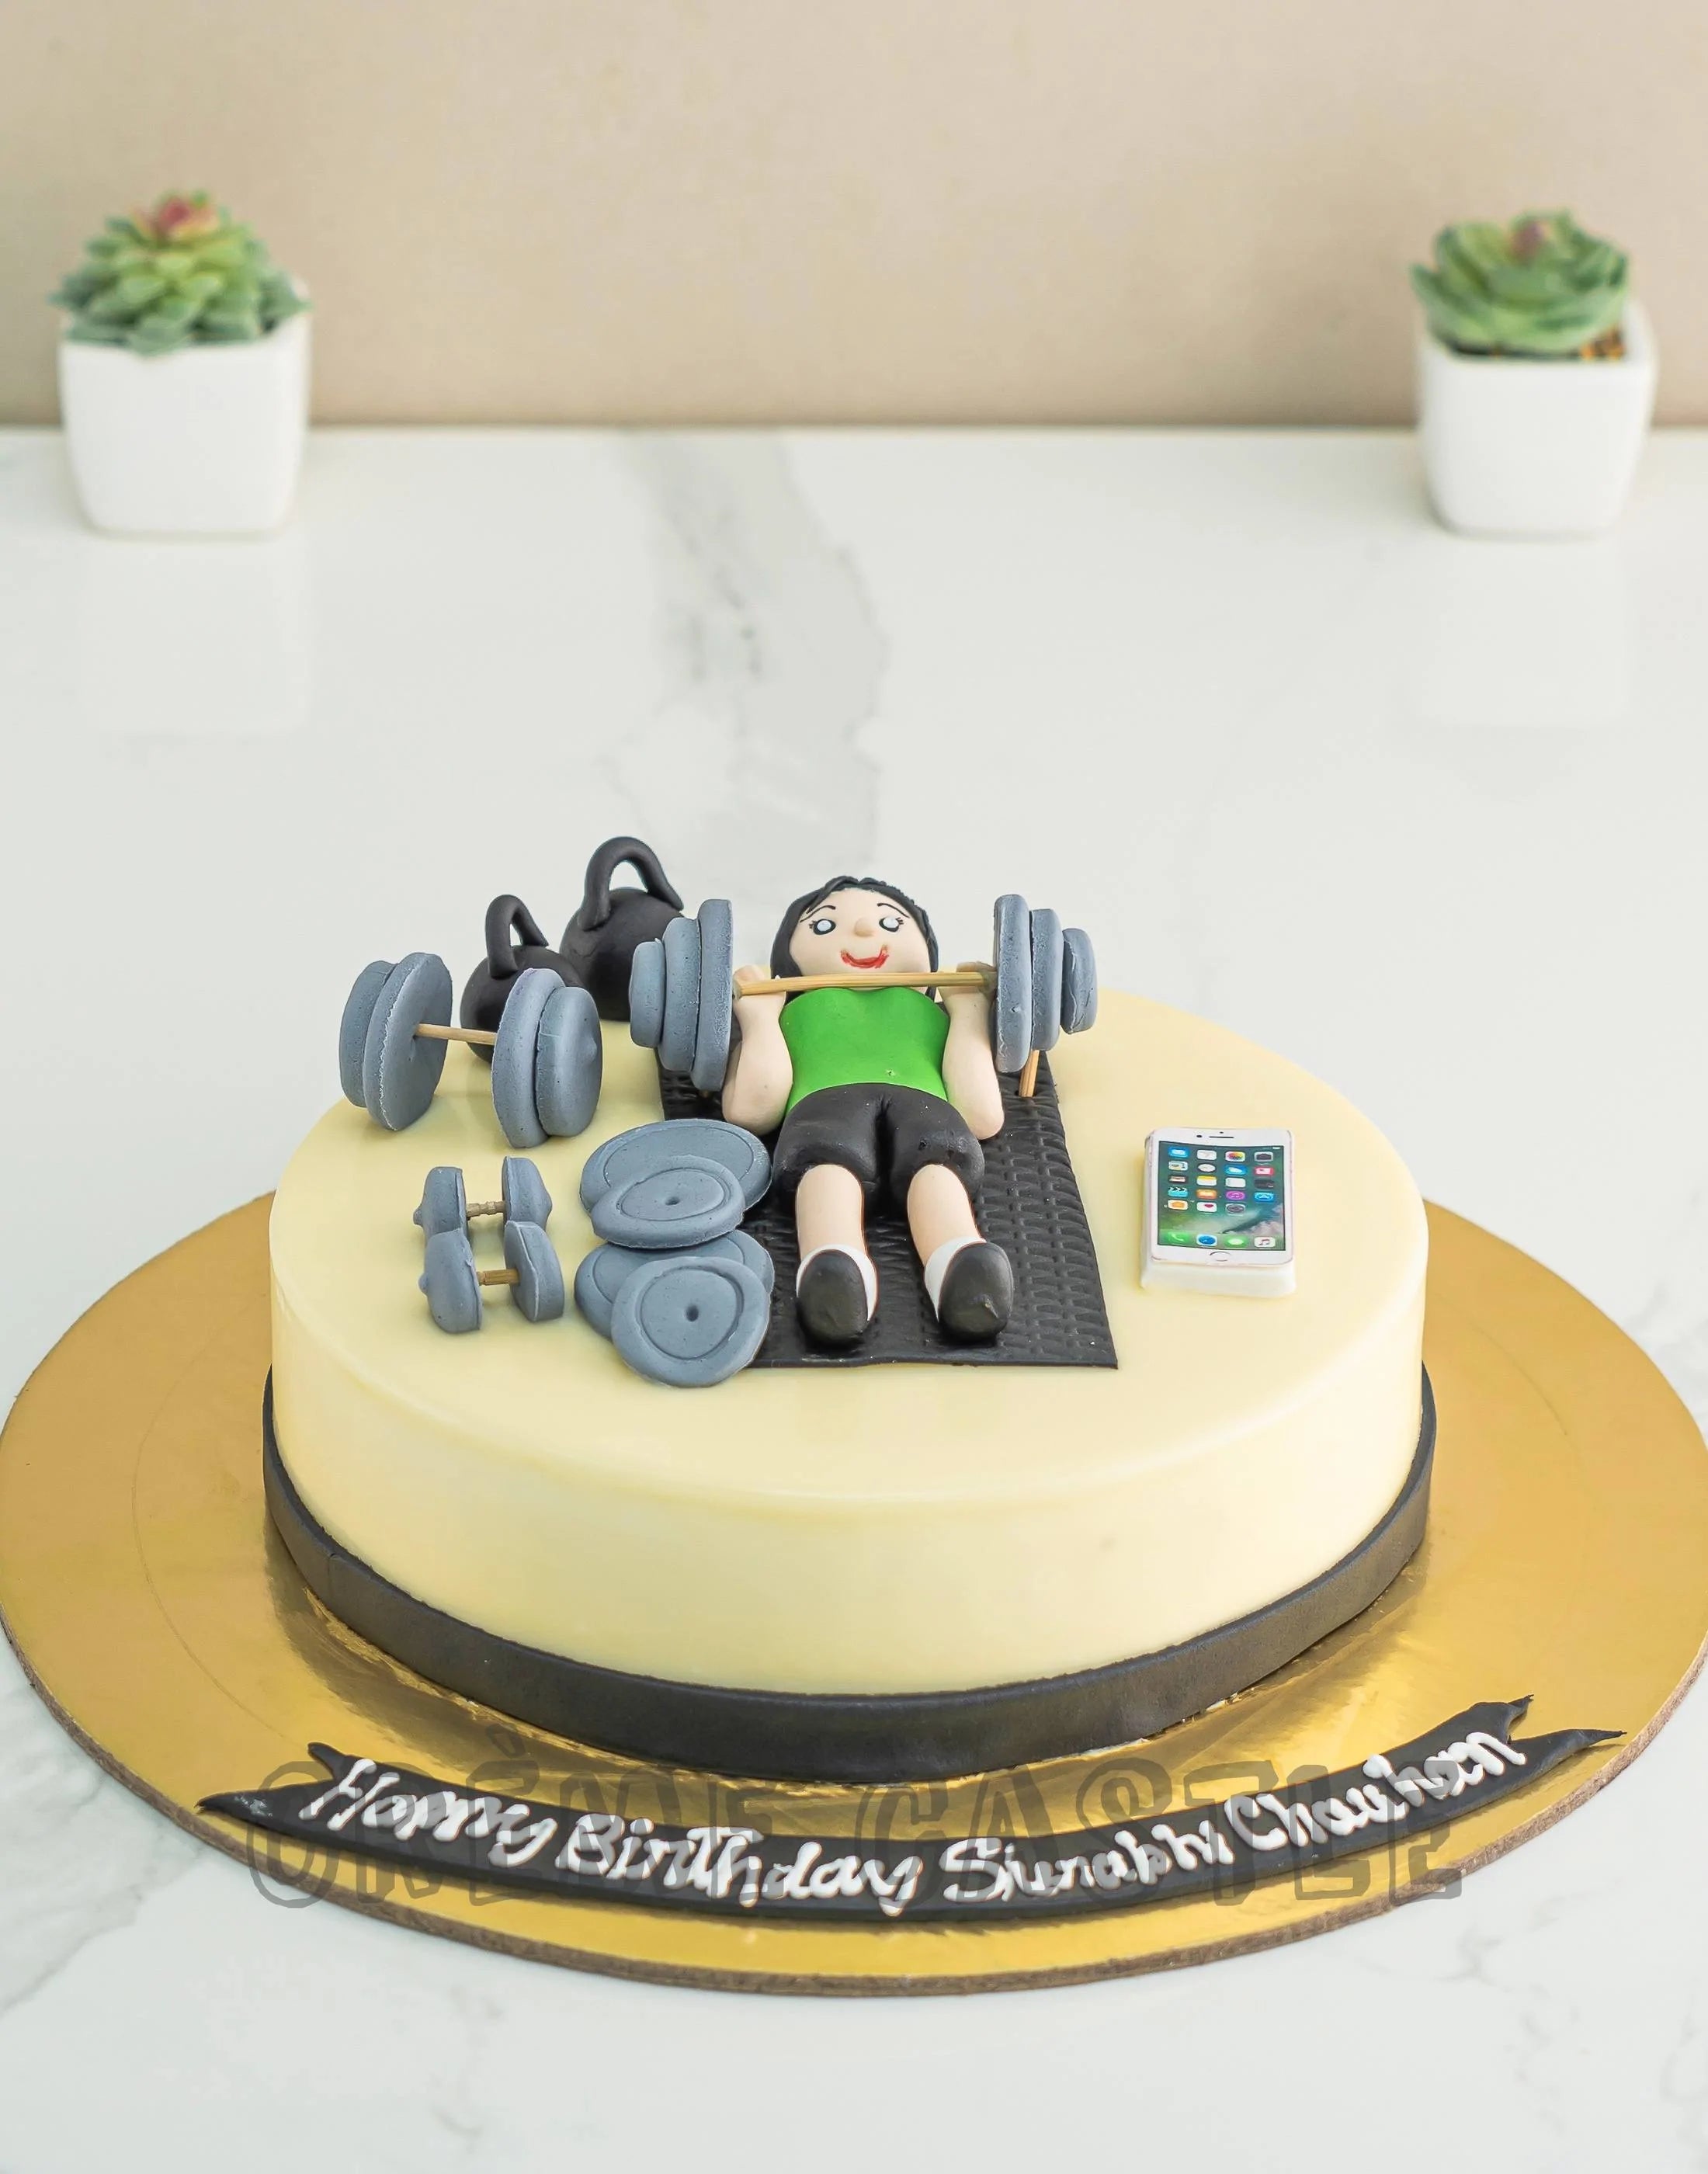 Personalised gym equipment fitness workout weights cake topper decoration |  eBay